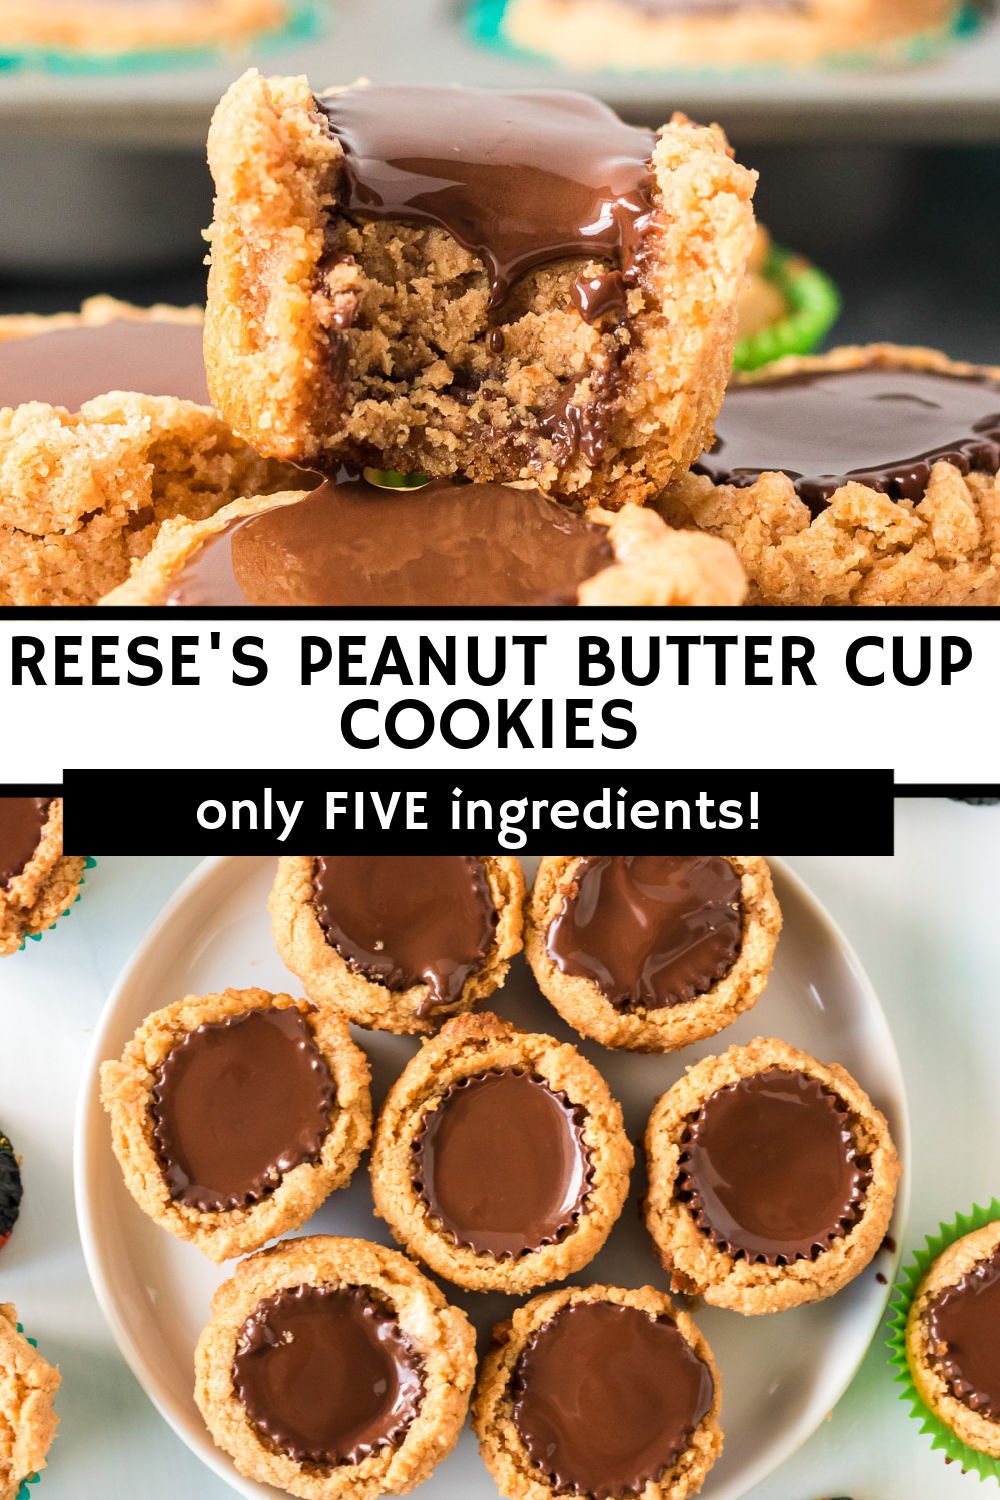 Only FIVE ingredients in these simple, from scratch, Peanut Butter Cup Cookies with a Reese's mini cup tucked inside. | www.persnicketyplates.com